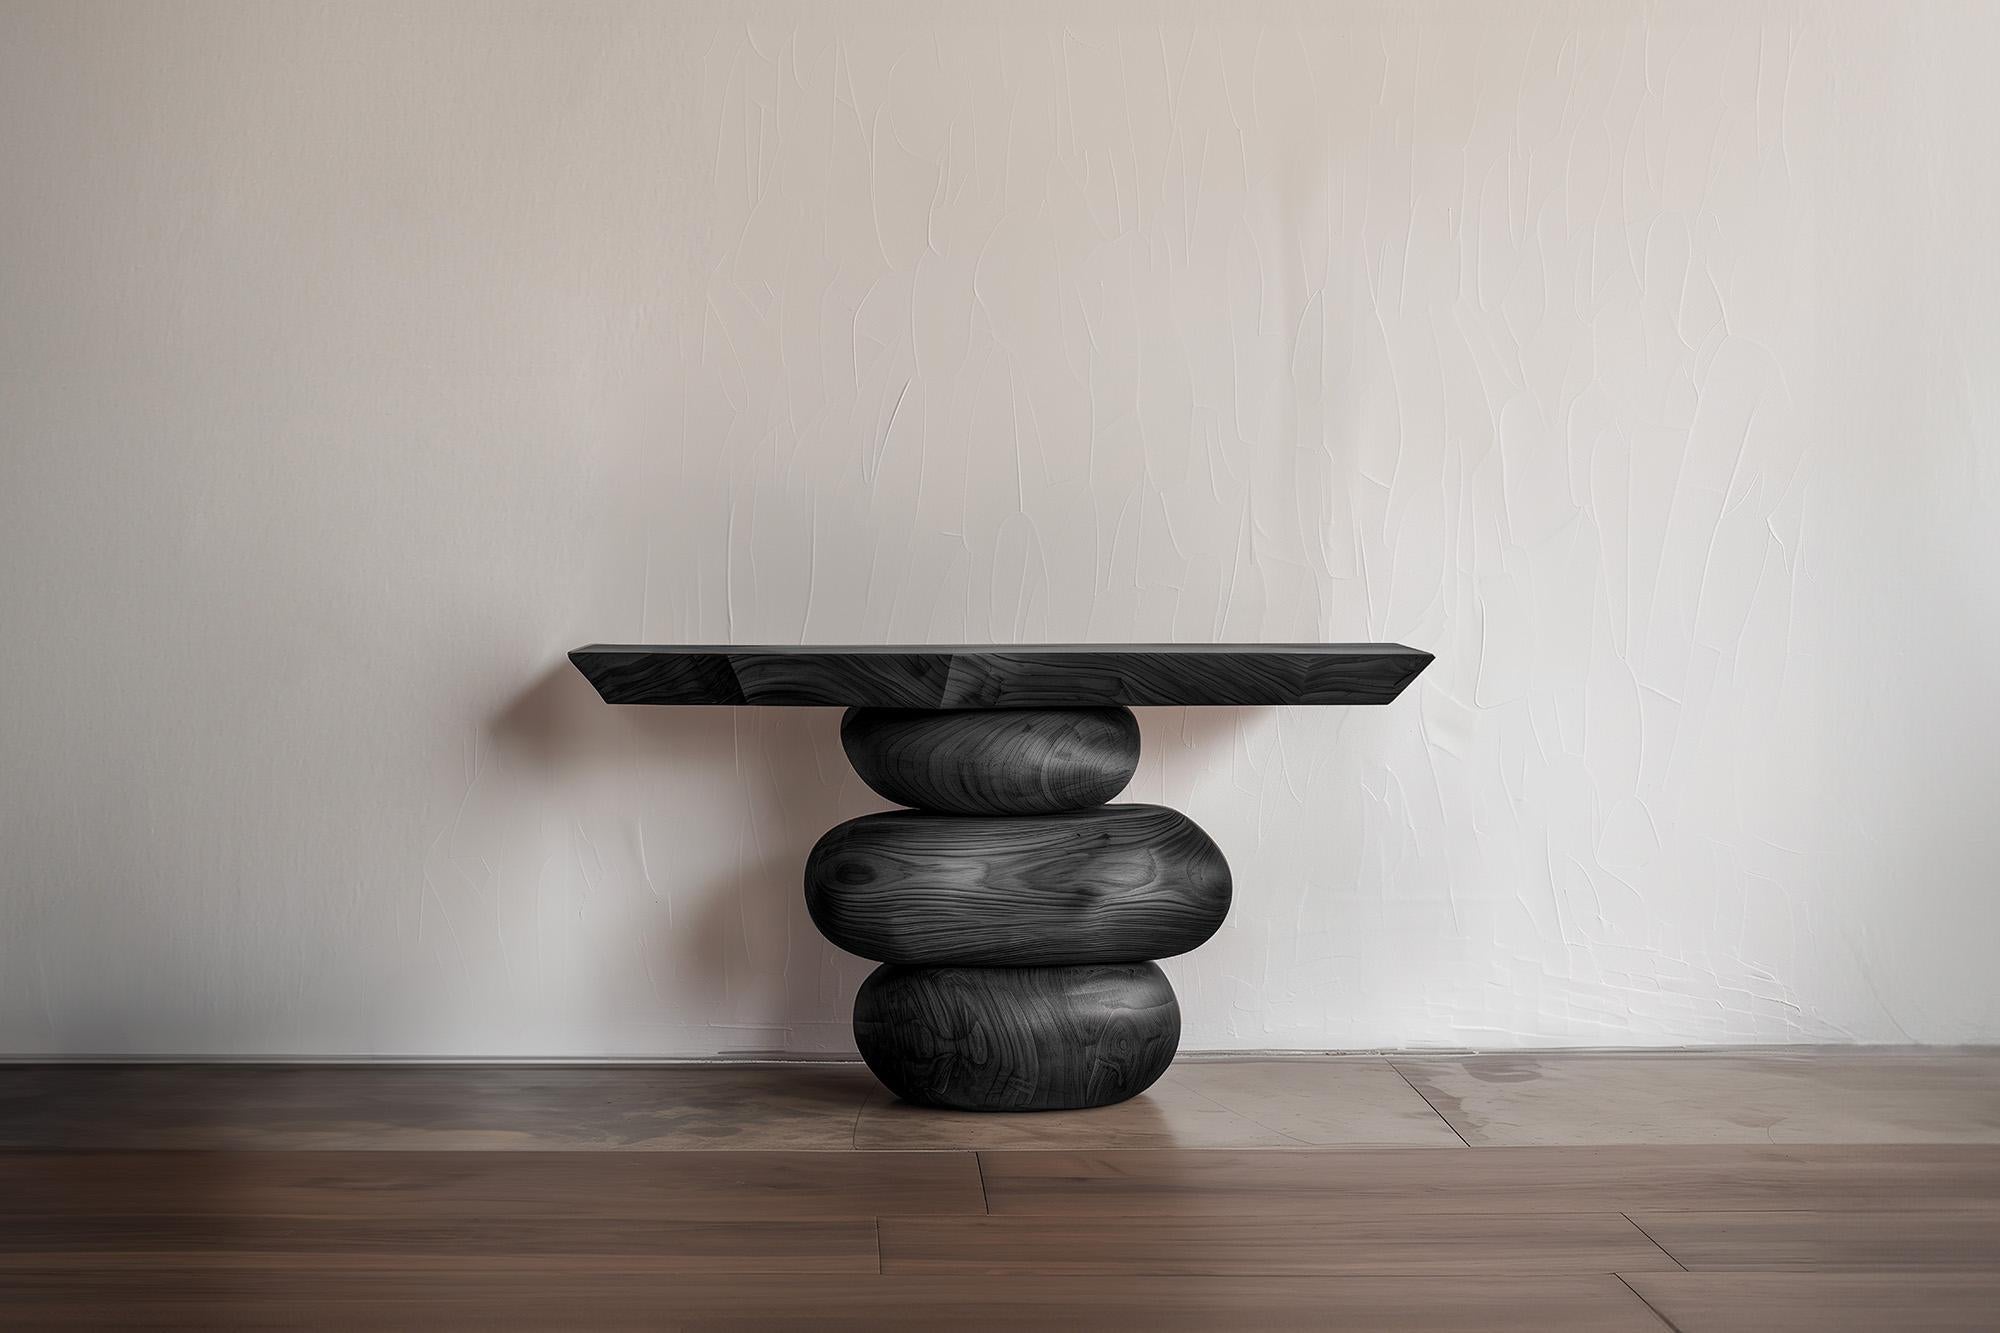 Joel Escalona's Elefante Table 24, NONO Solid Wood, Unique Form
—————————————————————
Elefante Collection: A Harmony of Design and Heritage by NONO

Crafting Elegance with a Modernist Touch

NONO, renowned for its decade-long journey in redefining